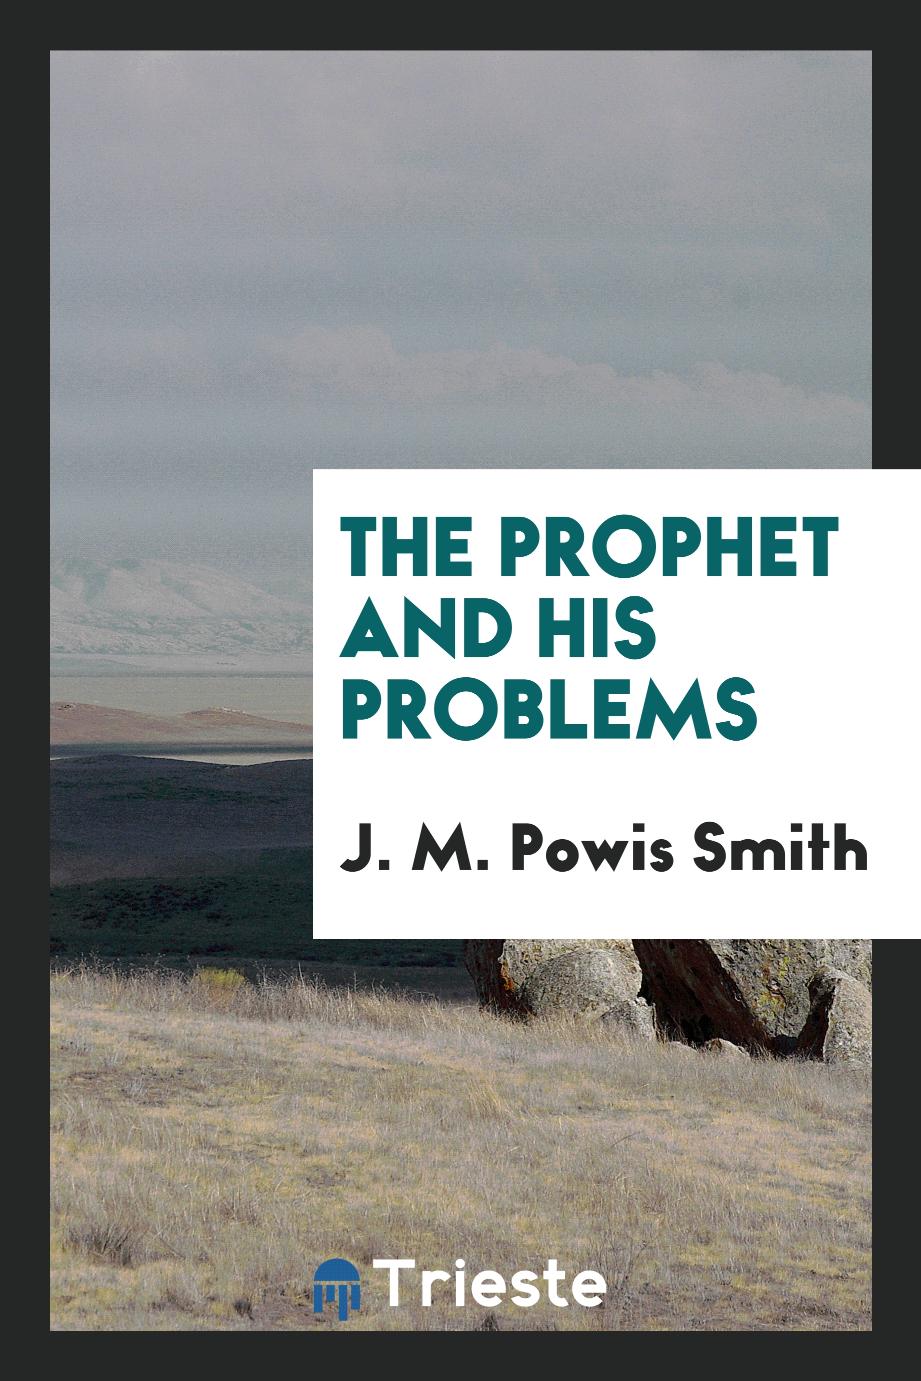 The prophet and his problems